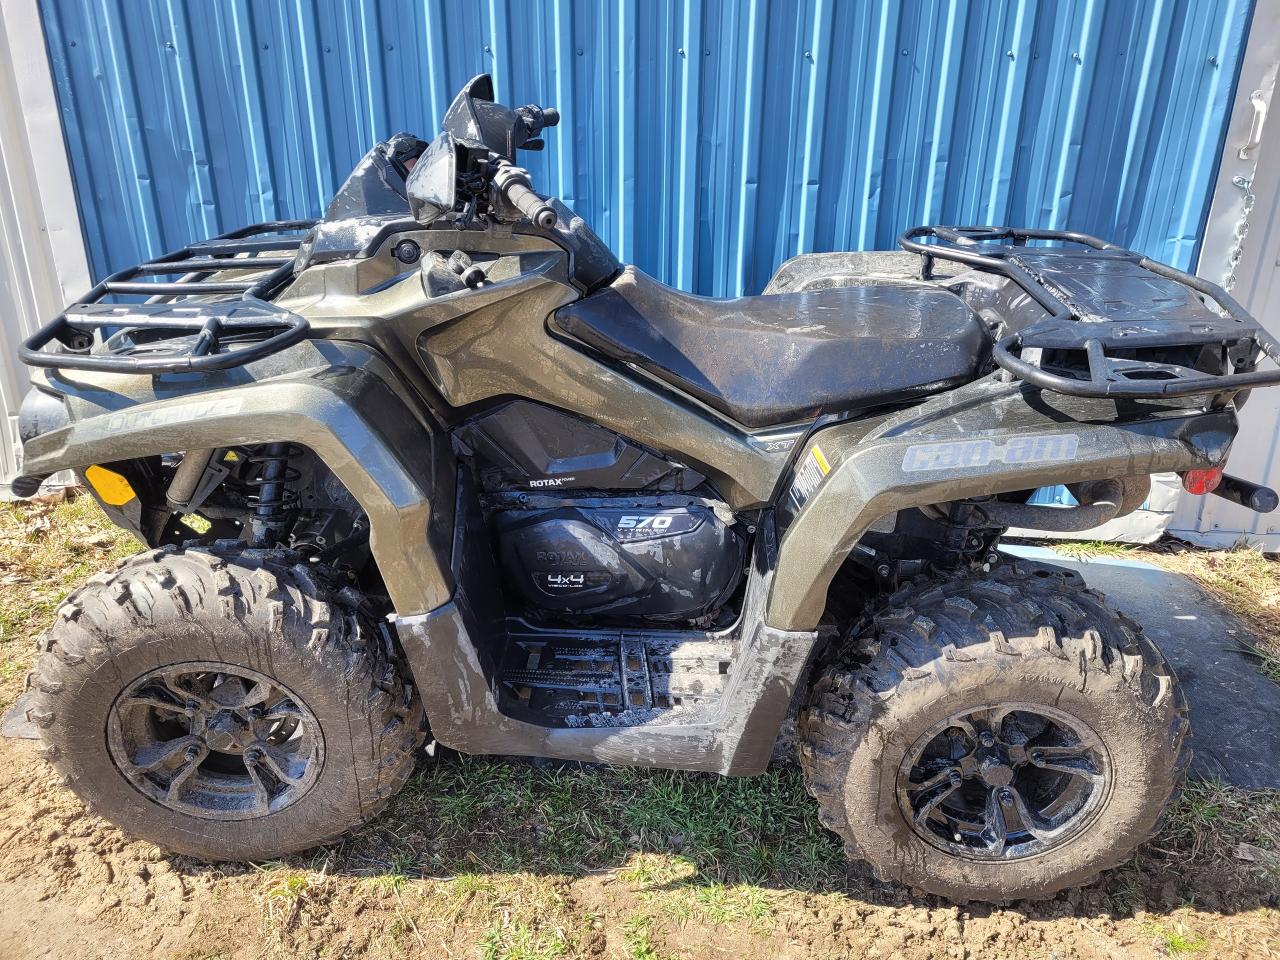 2023 Can-Am Outlander 570 XT DPS *1-Owner* Financing Available & Trades Welcome! - Photo #1